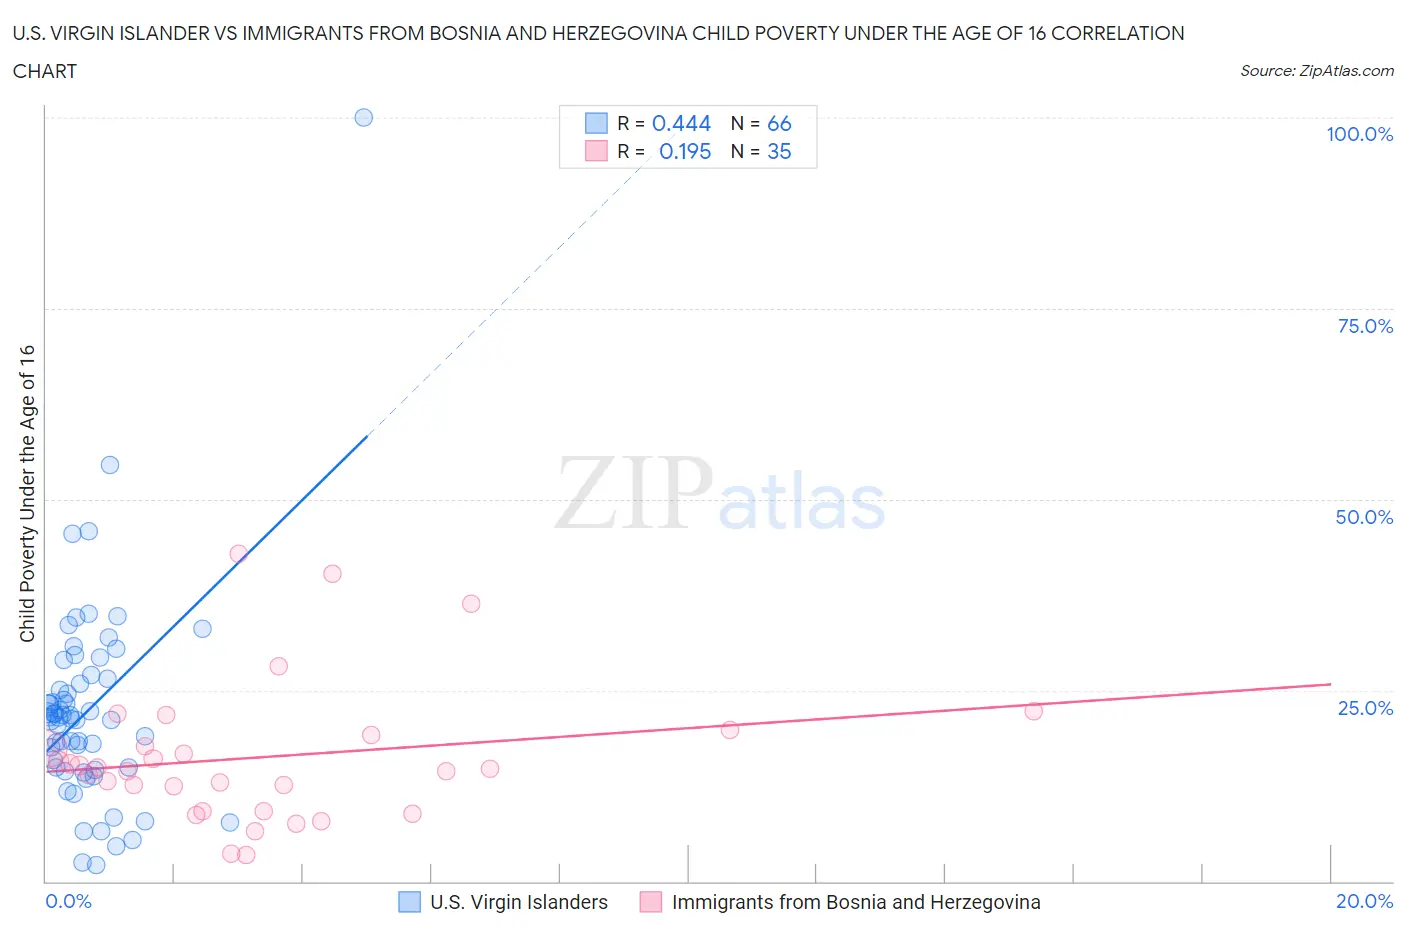 U.S. Virgin Islander vs Immigrants from Bosnia and Herzegovina Child Poverty Under the Age of 16